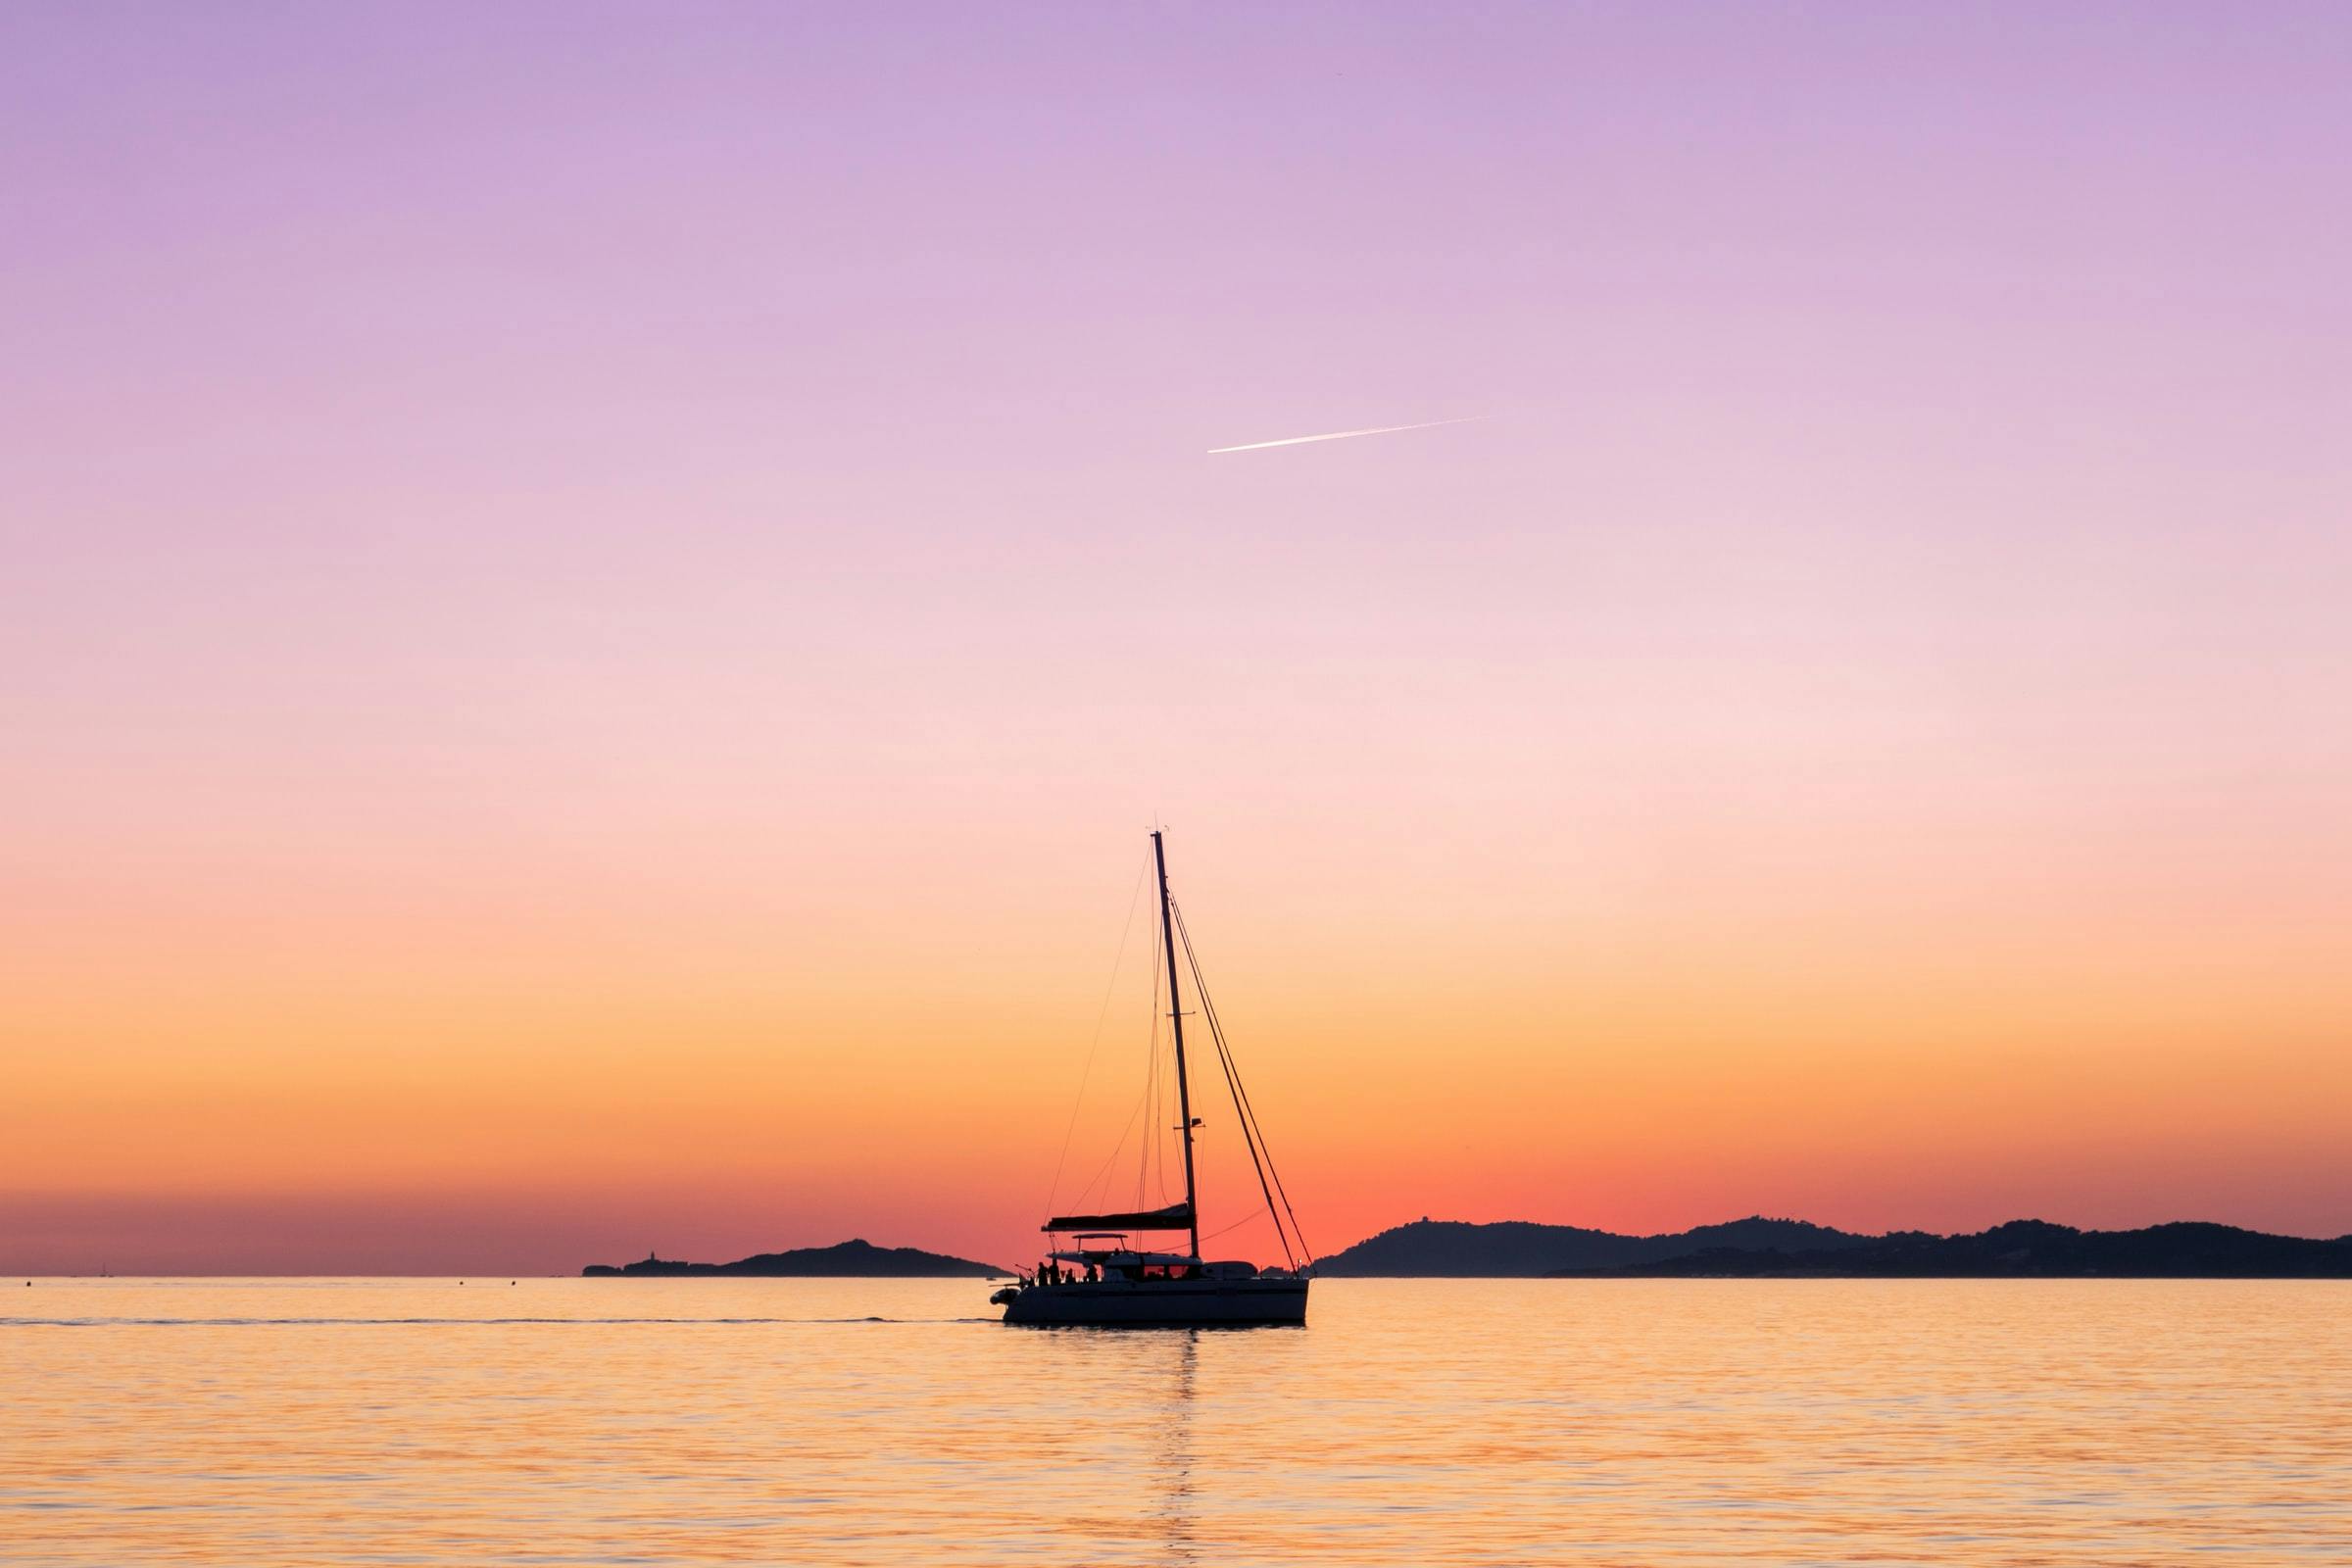 Boat in an purple, orange and red sunset